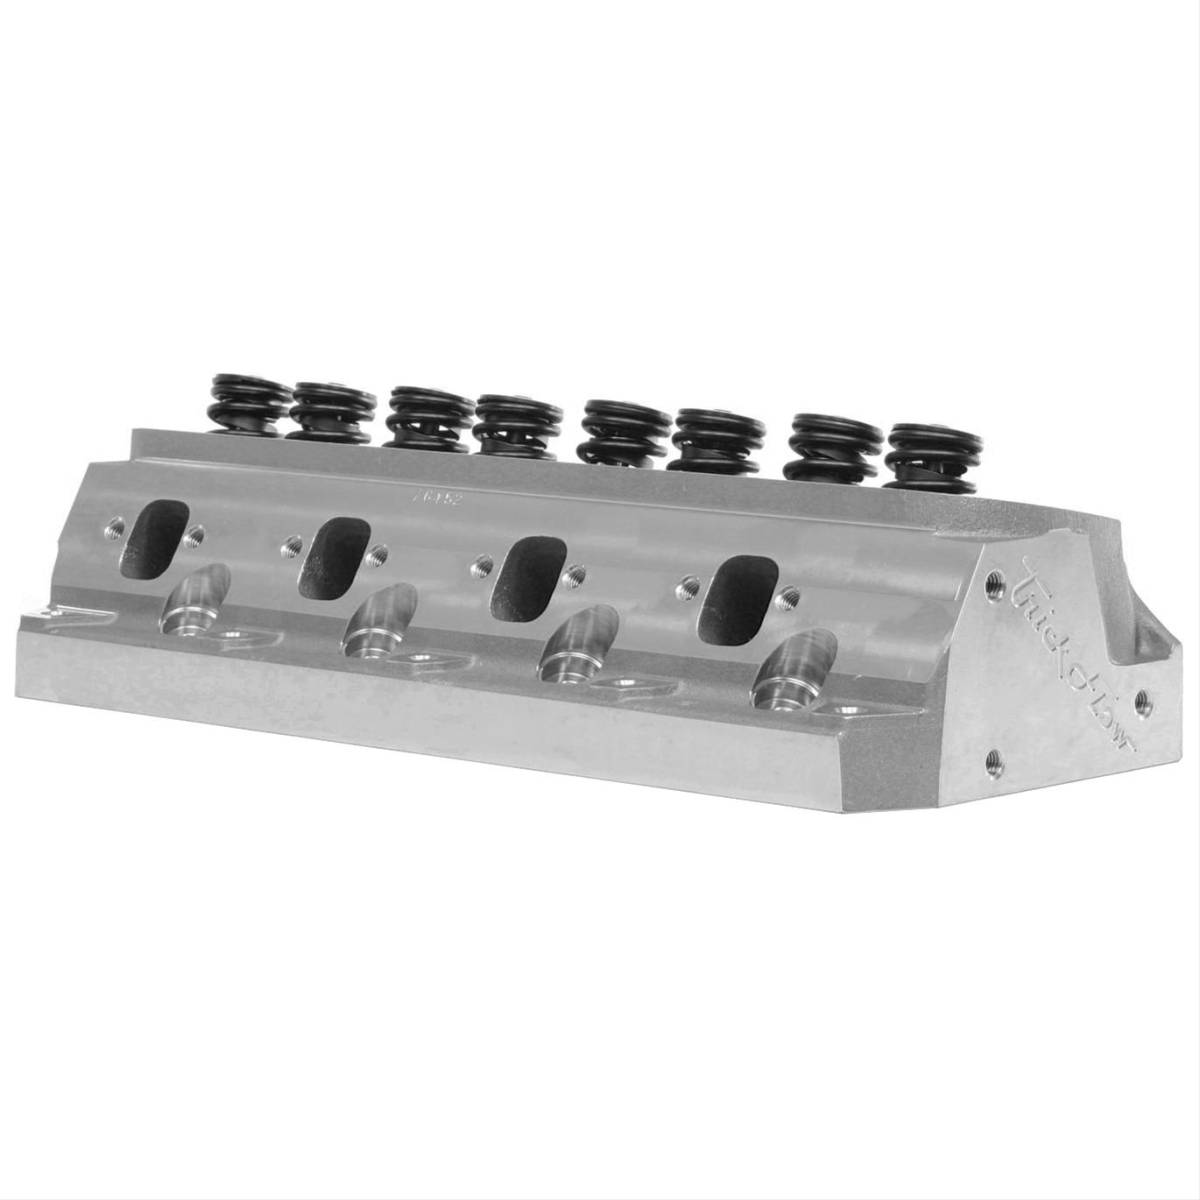 Trickflow - Trickflow Twisted Wedge SBF 170cc Cylinder Heads Dual Valve 58cc Max Lift .600 - Image 1